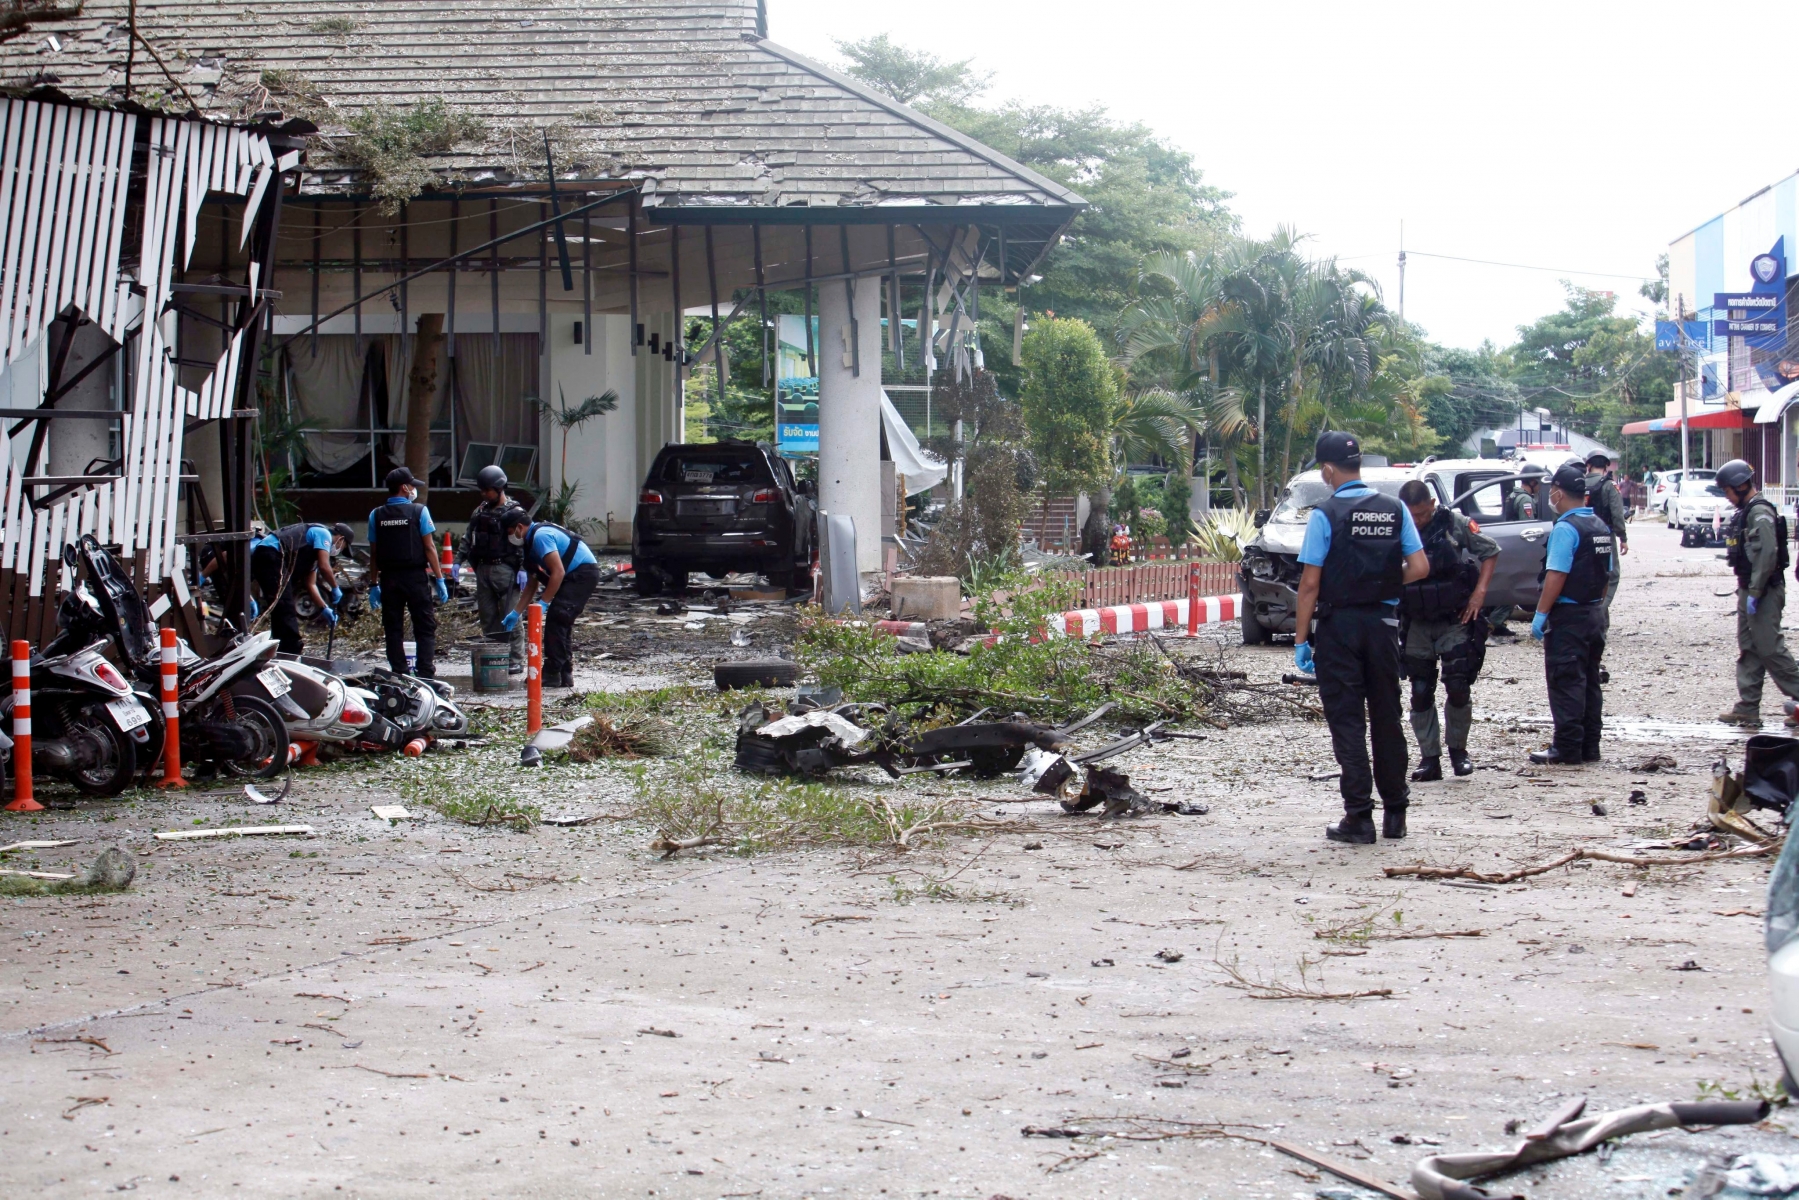 epa05508101 Thai forensic police officers and members of Explosive Ordnance Disposal (EOD) unit inspect a blast scene after a car bomb attack at a hotel in Pattani, southern Thailand, 24 August 2016. A series of separate bomb attacks, including a bomb hidden in a truck, exploded at a car park of hotel,  killing one woman and wounding 29 people, media reports.  EPA/ABDULLAH WANGNI THAILAND BOMBING